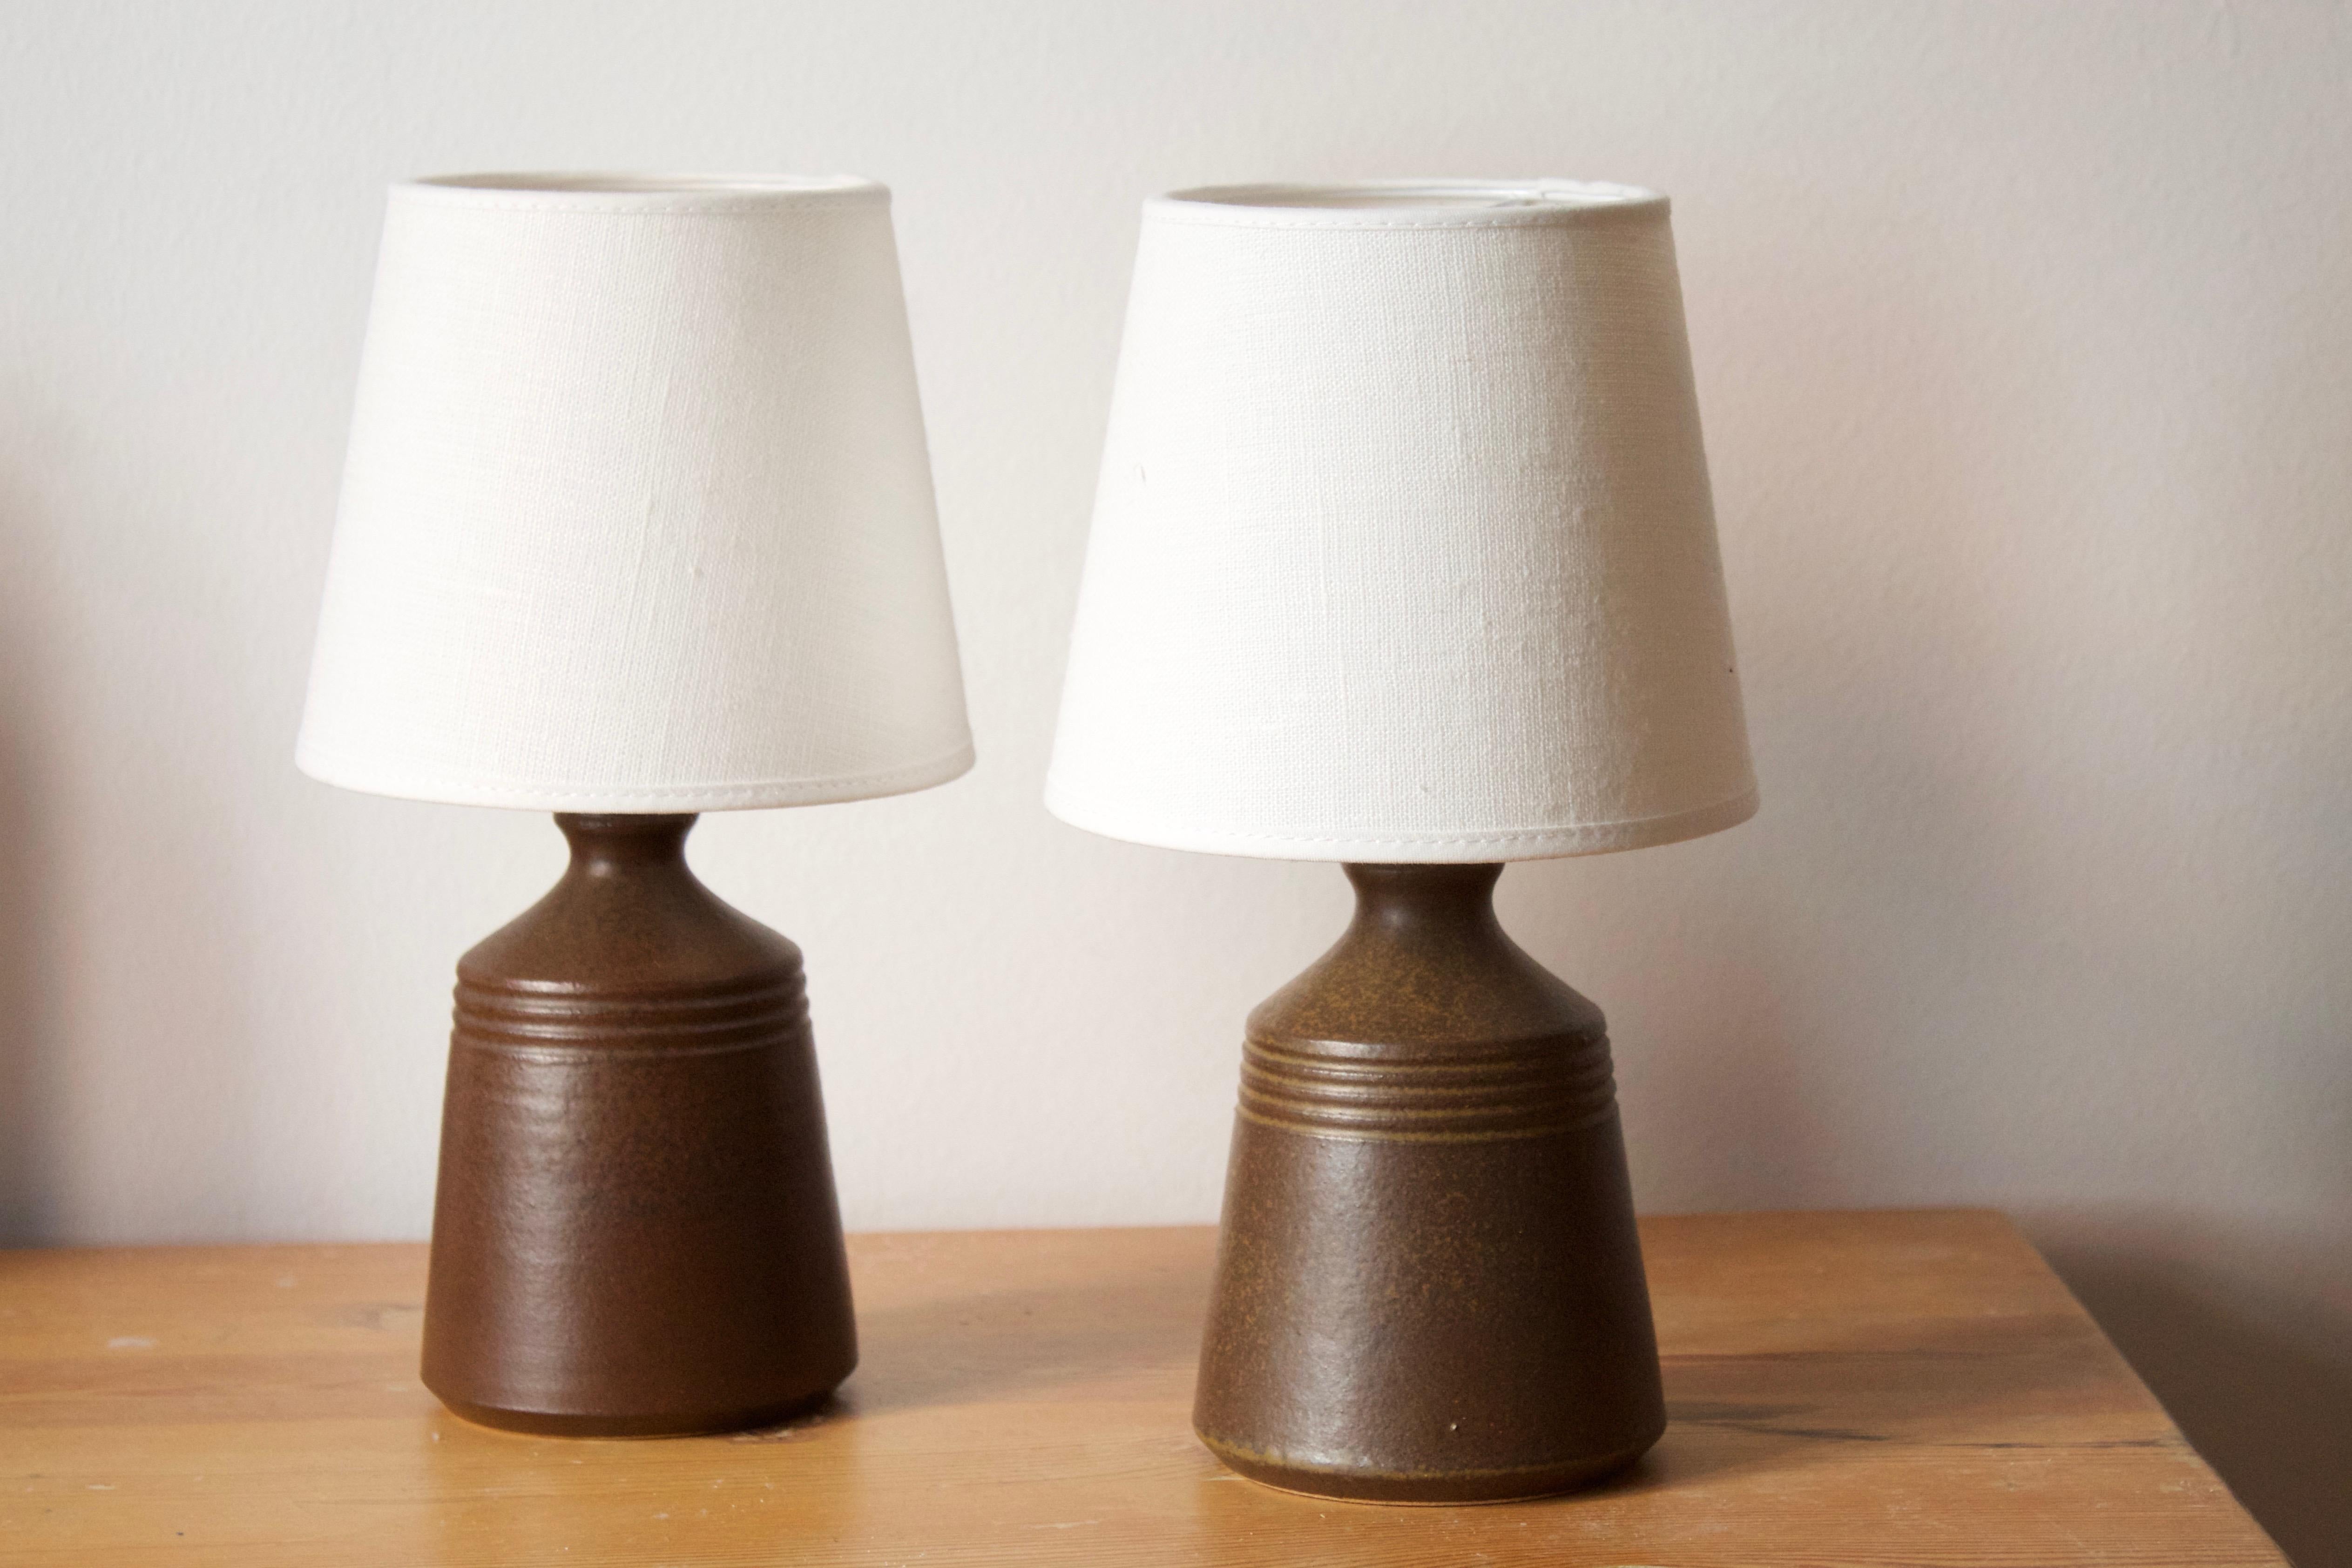 A pair of small table lamps. Designed and produced by Skottorp Stengods. Signed and stamped. Features simple incised decoration. 

Stated dimensions exclude lampshade. Height includes socket. Sold without lampshades.

Glaze features a brown color.